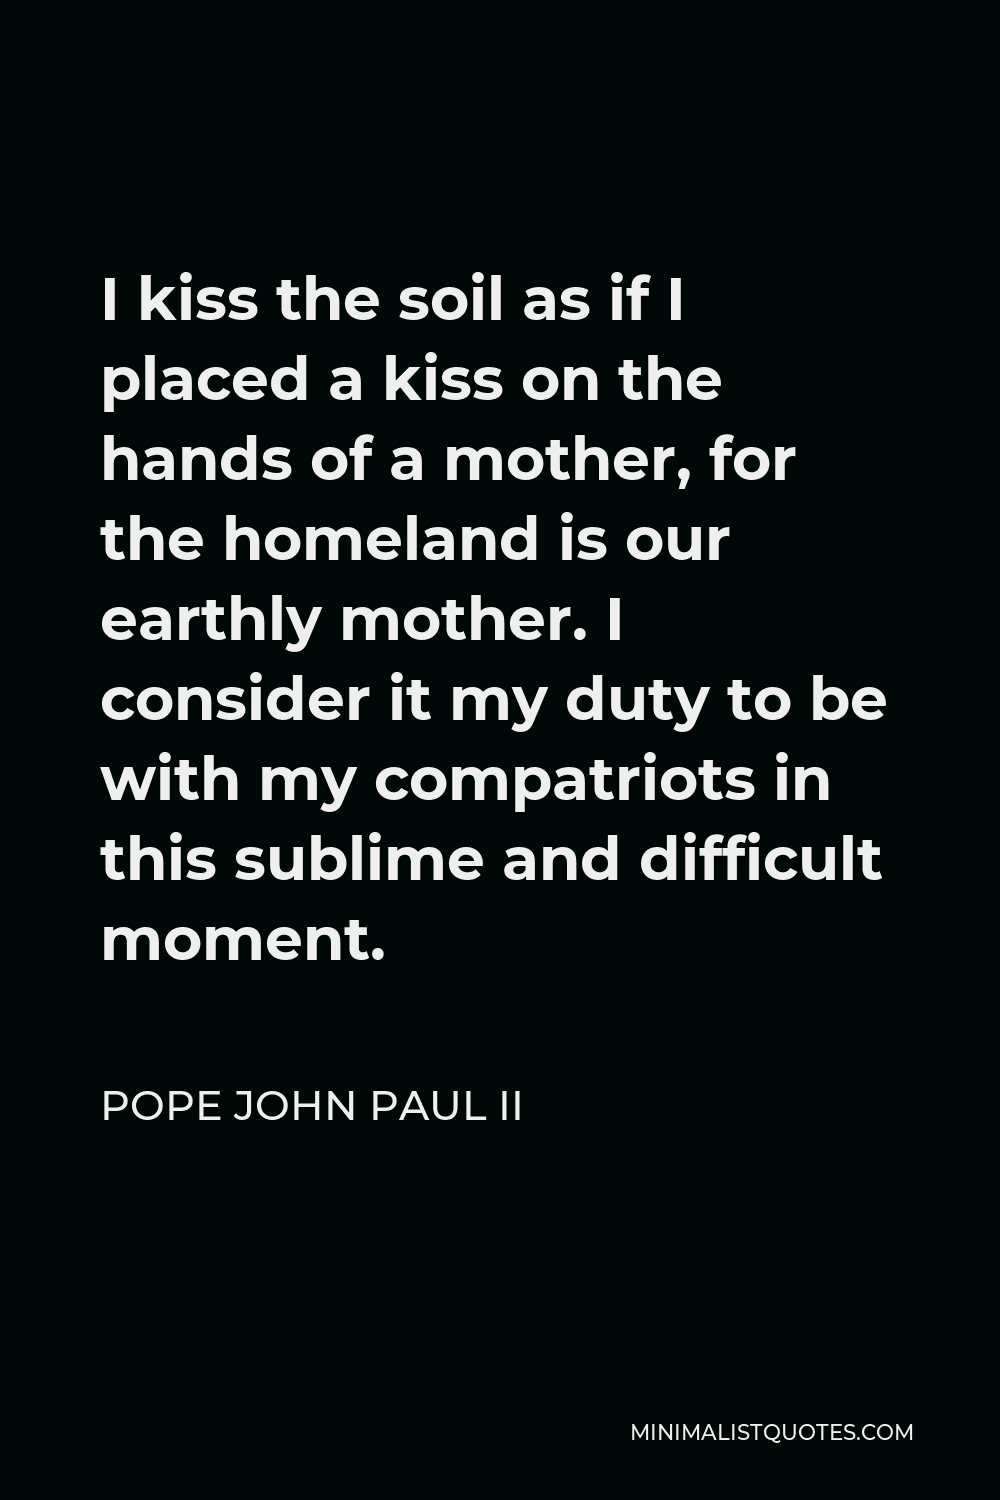 Pope John Paul II Quote - I kiss the soil as if I placed a kiss on the hands of a mother, for the homeland is our earthly mother. I consider it my duty to be with my compatriots in this sublime and difficult moment.